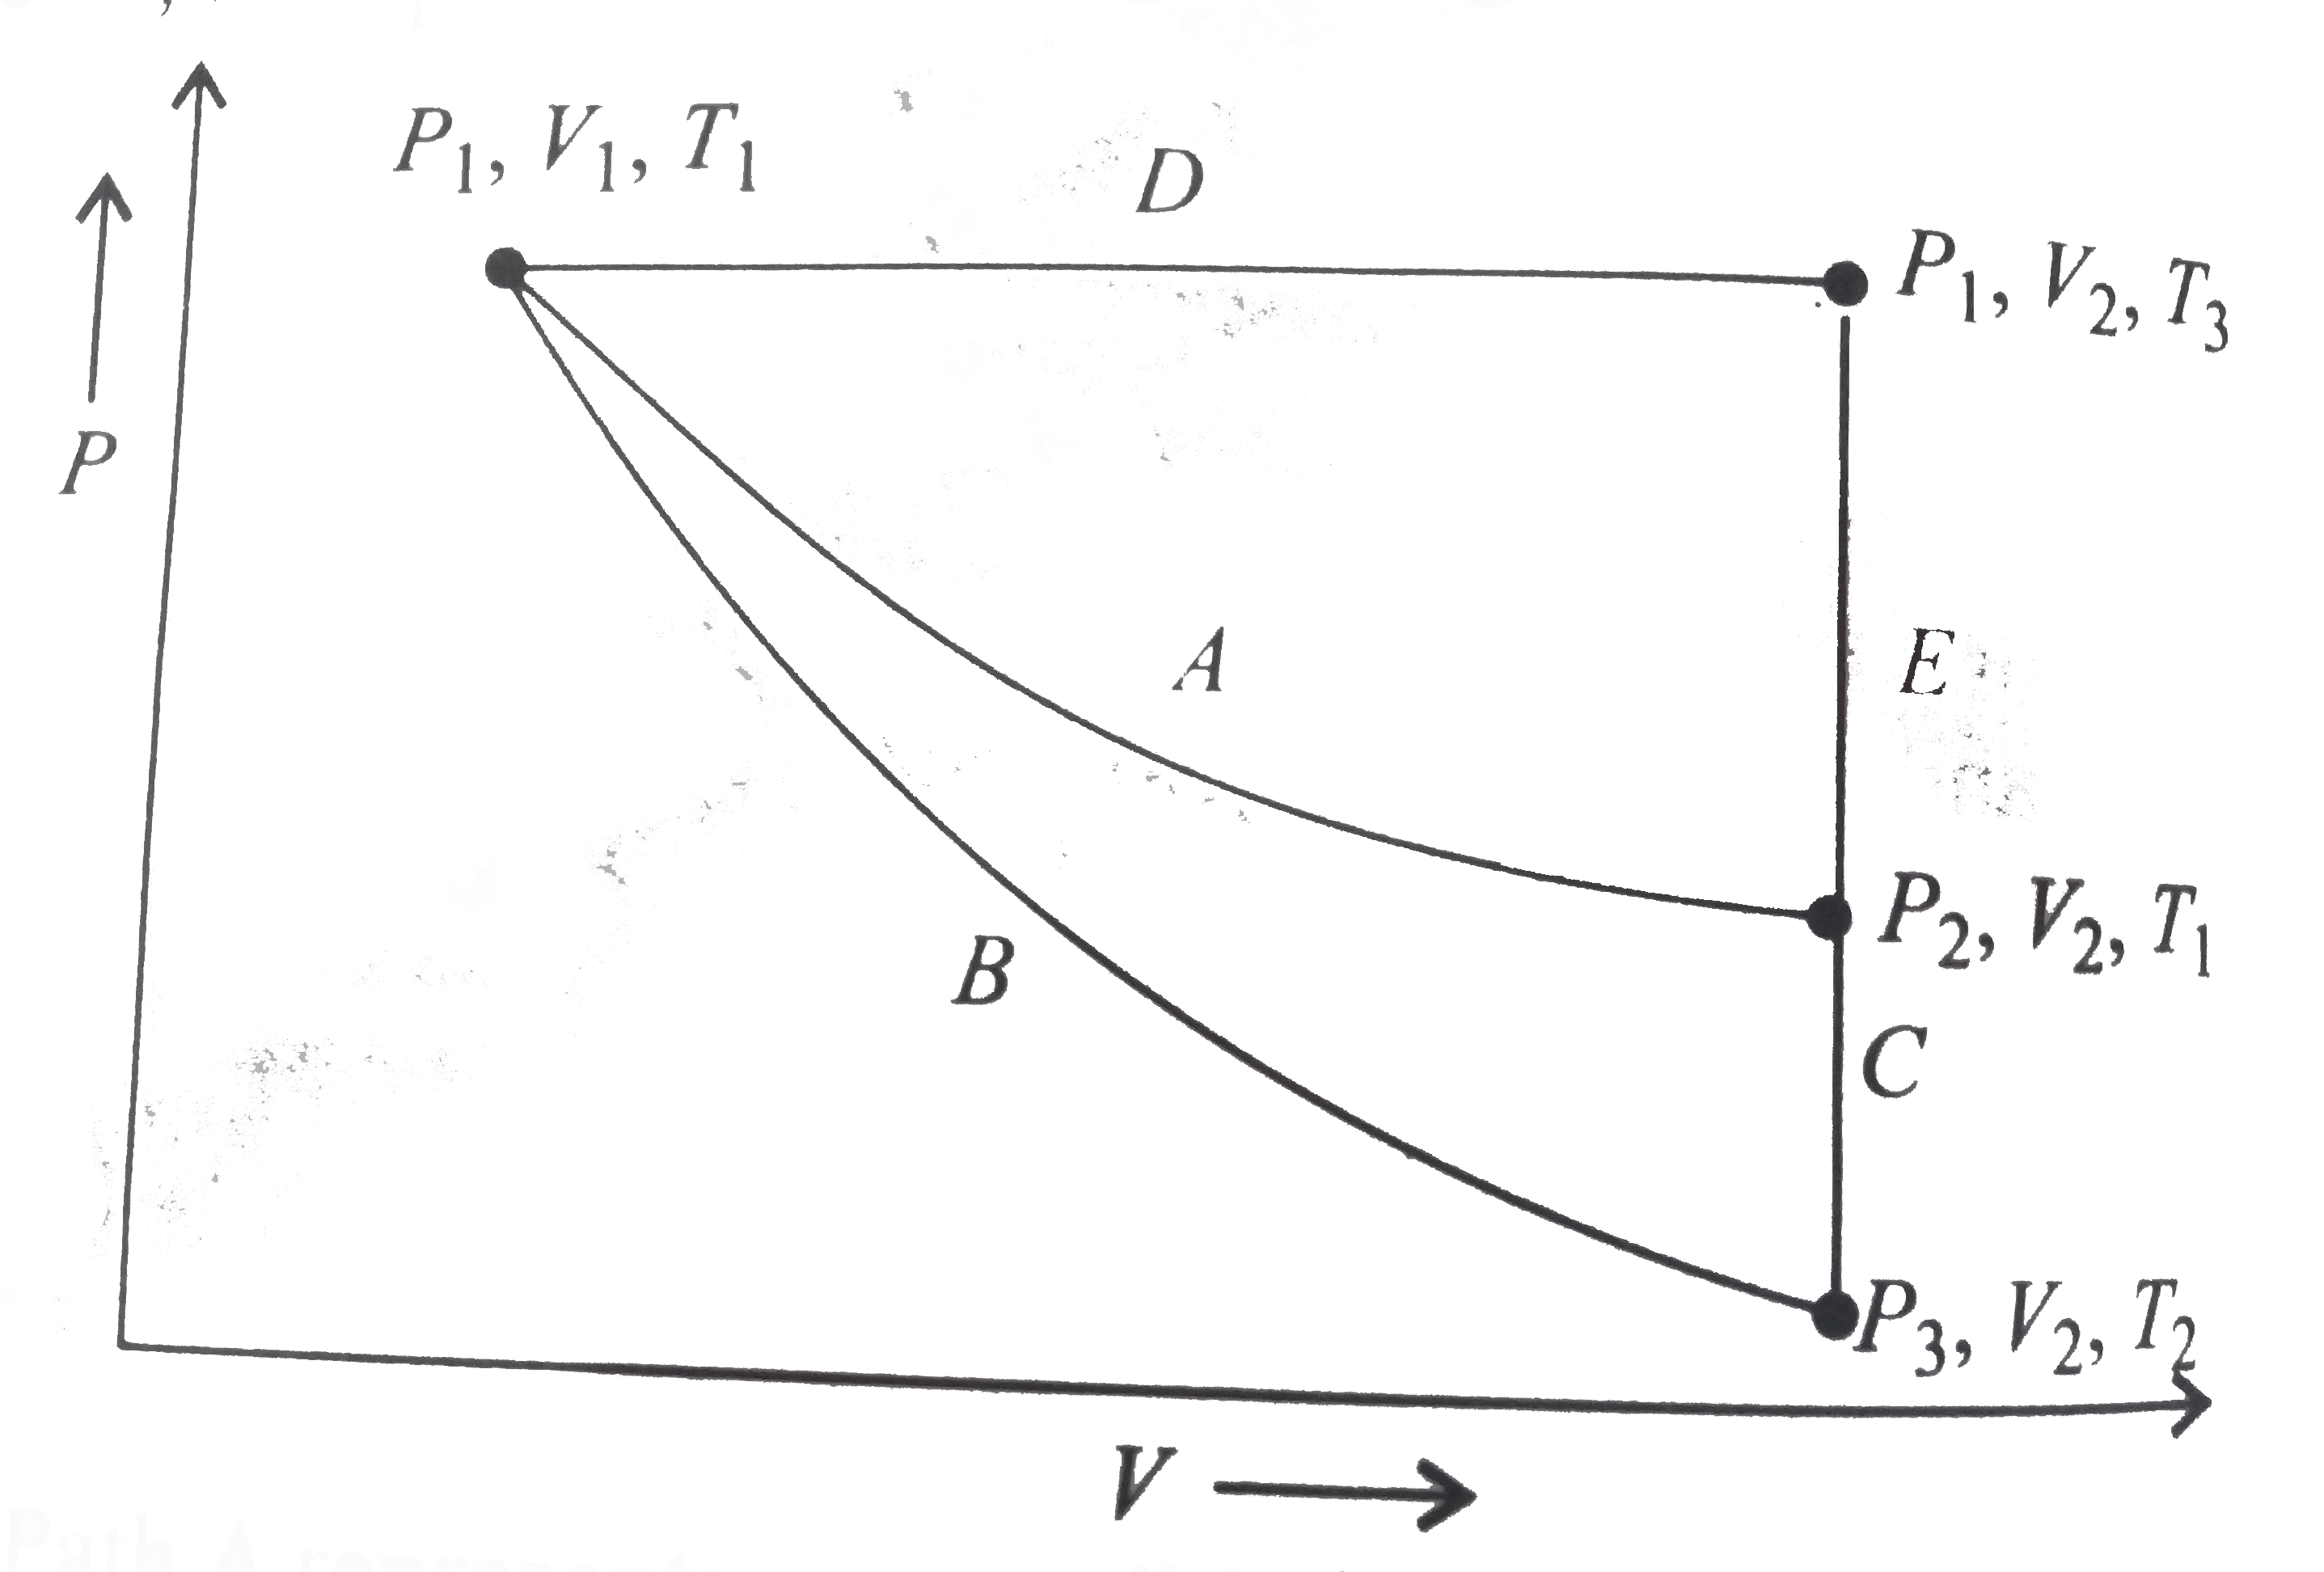 For an ideal gas, an illustratio of three different paths A(B+C) and (D+E) from an initial state P(1), V(1), T(1) to a final state P(2), V(2),T(1) is shown in the given figure.      Path Arepresents a reversible isothermal expansion form P(1),V(1) to P(2),V(2), Path (B+C) represents a reversible adiabatic expansion (B) from P(1),V(1),T(1)to P(3),V(2),T(2) followed by reversible heating the gas at constant volume (C)from P(3),V(2),T(2) to P(2),V(2),T(1). Path (D+E) represents a reversible expansion at constant pressure P(1)(D) from P(1),V(1),T(1) to P(1),V(2),T(3) followed  by a reversible cooling at constant volume V(2)(E) from P(1),V(2),T(3) to P(2),V(2),T(1).    What is q(rev), for path (D+E)?